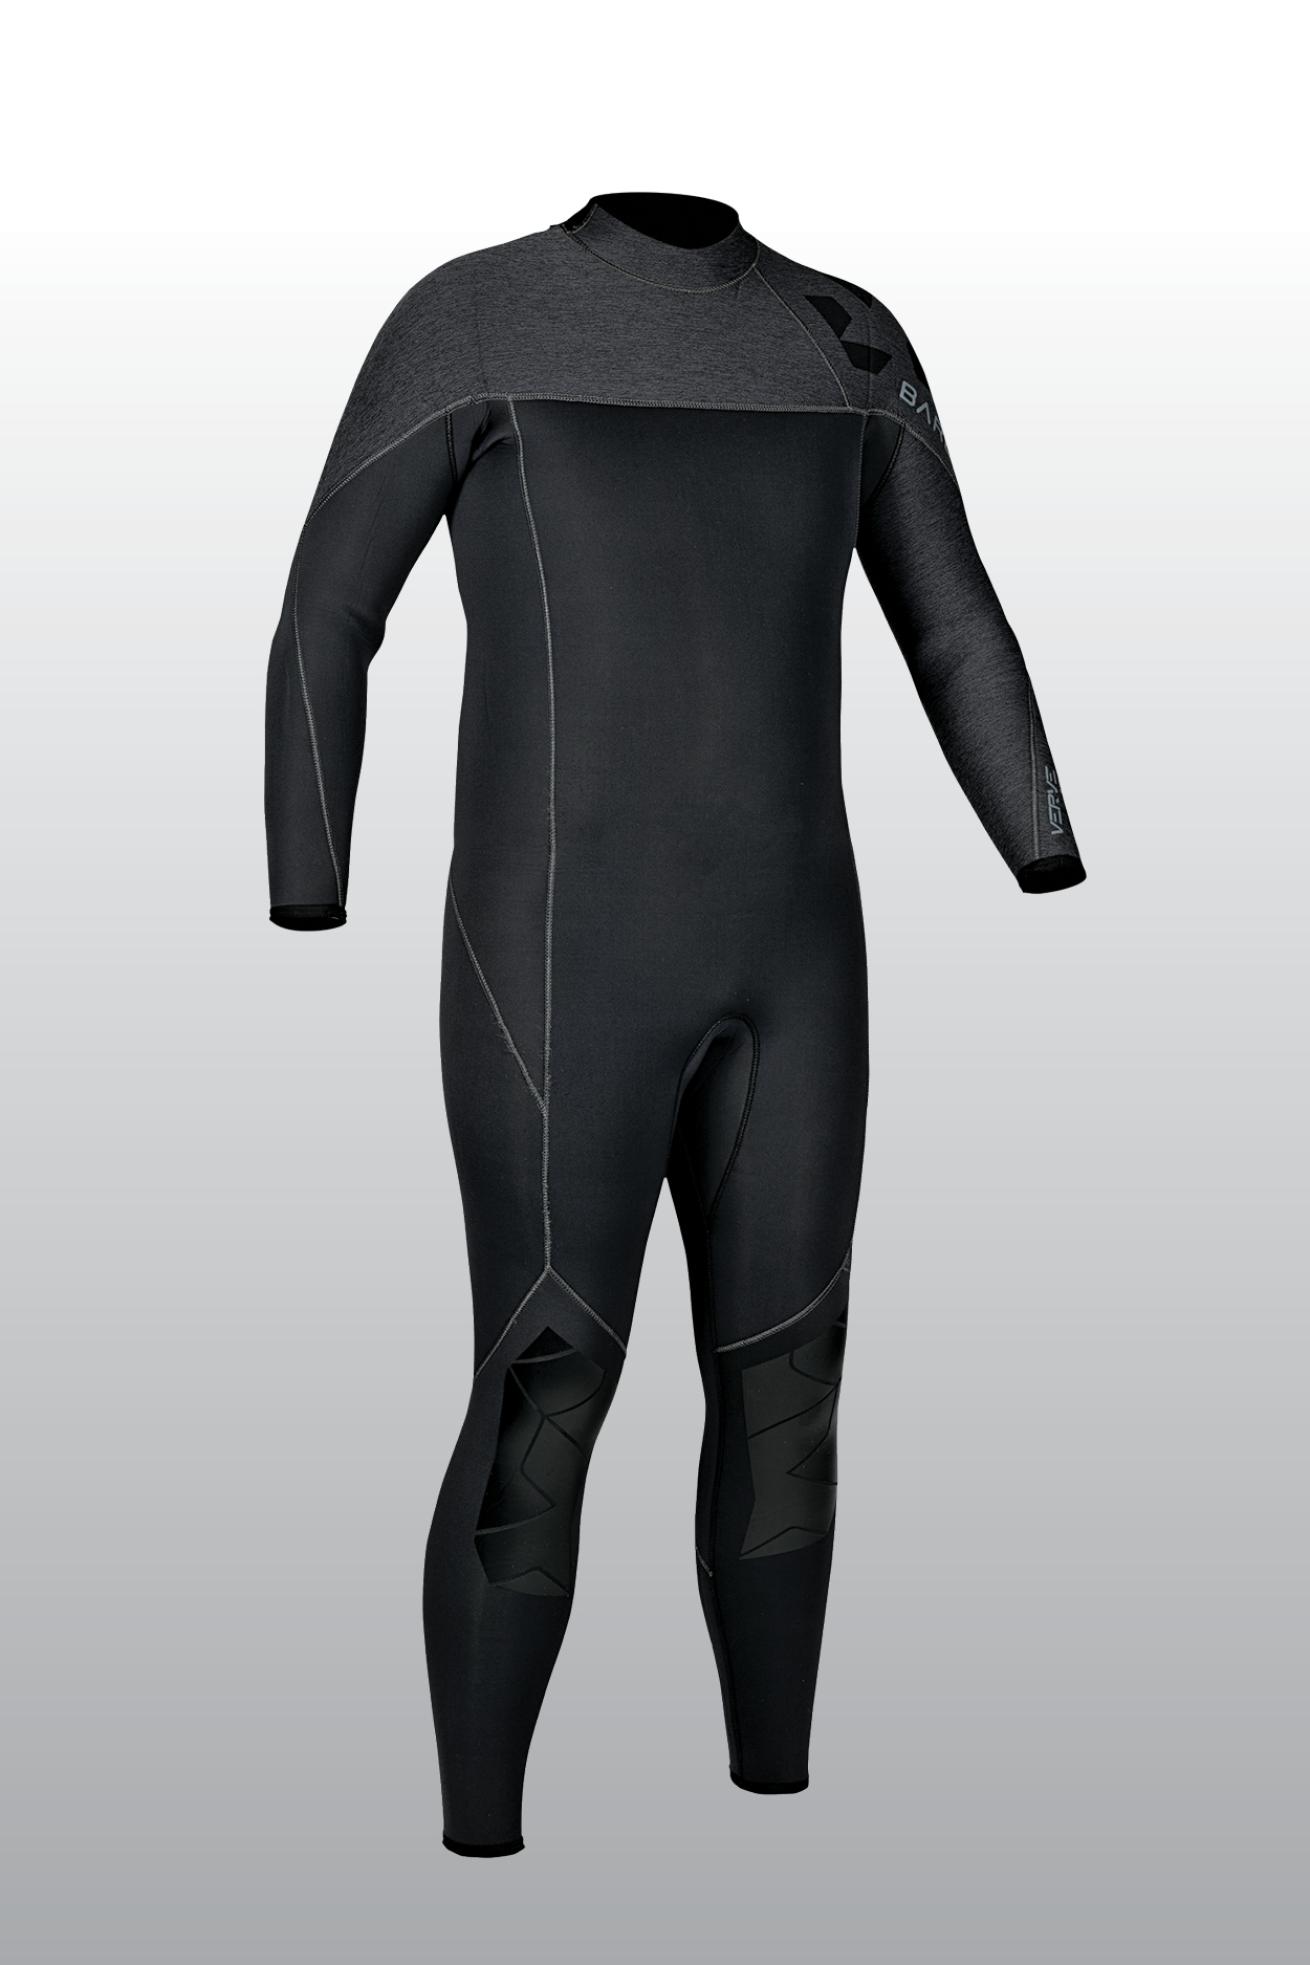 Diving Suits Warm Wetsuit One-piece Tight Elastic Comfortable Spear Fishing  Equipment Neoprene Underwater Accessory Professional Men Gray XL